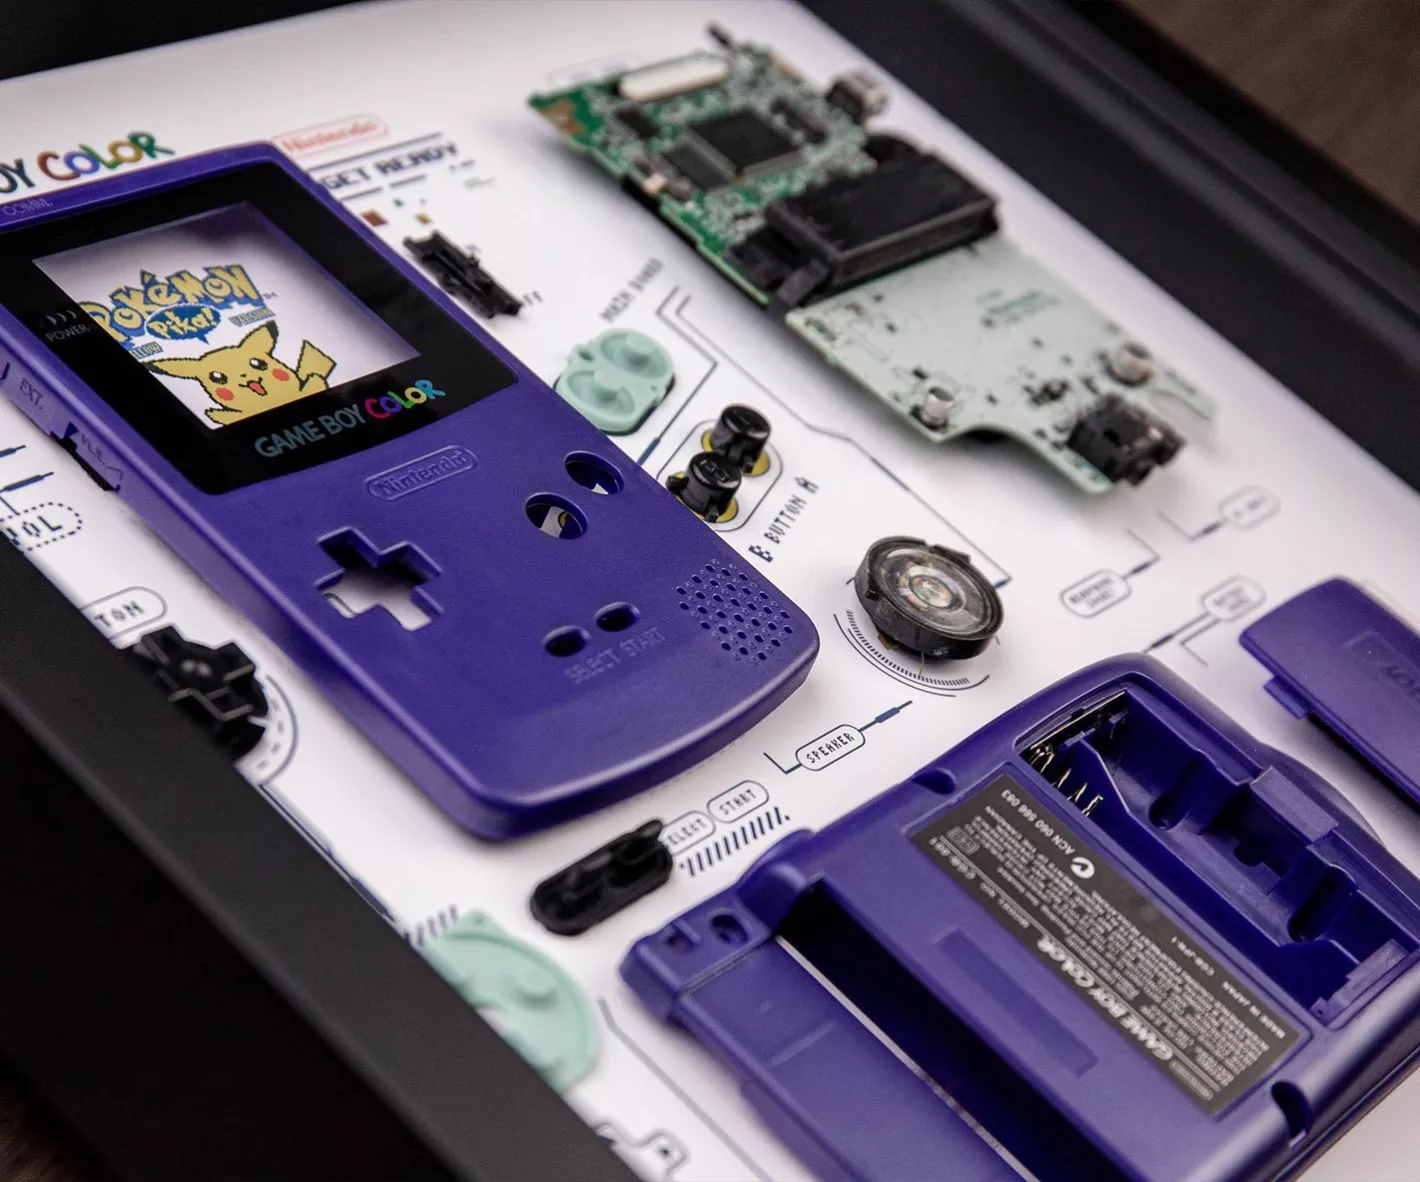 Who Knew A Game Boy's Insides Could Be So Beautiful?